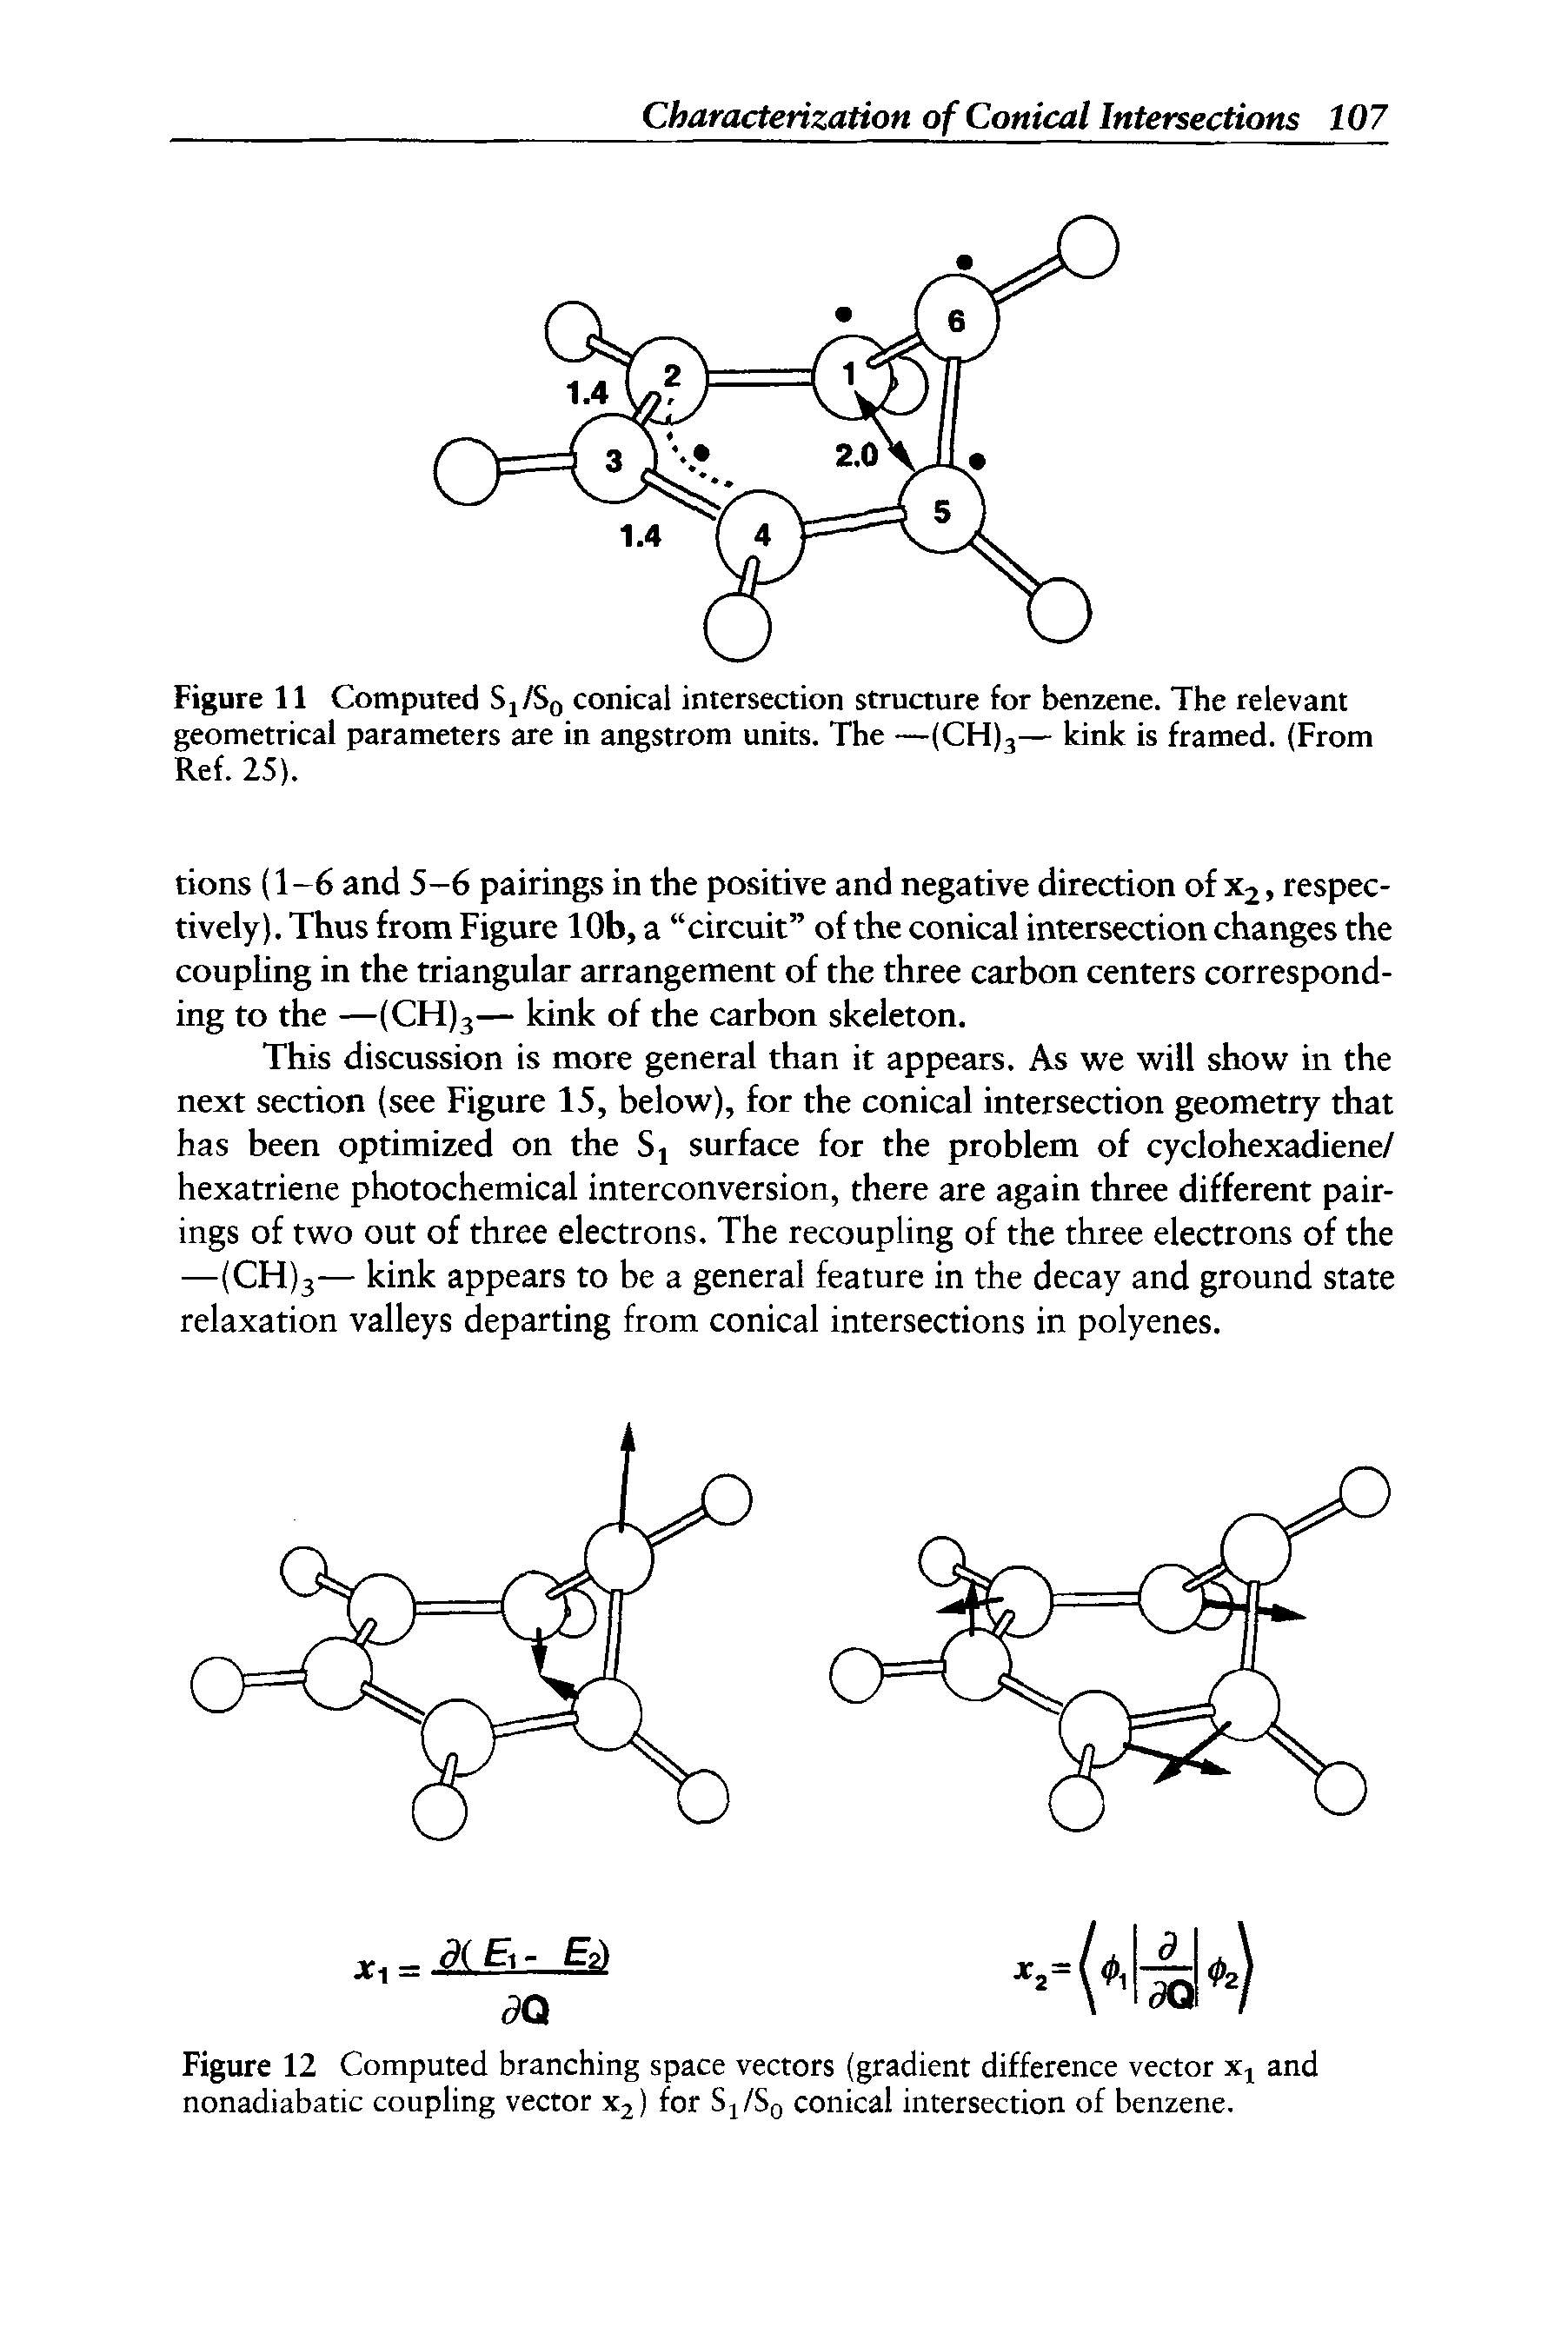 Figure 12 Computed branching space vectors (gradient difference vector xx and nonadiabatic coupling vector x2) for Sj/S0 conical intersection of benzene.